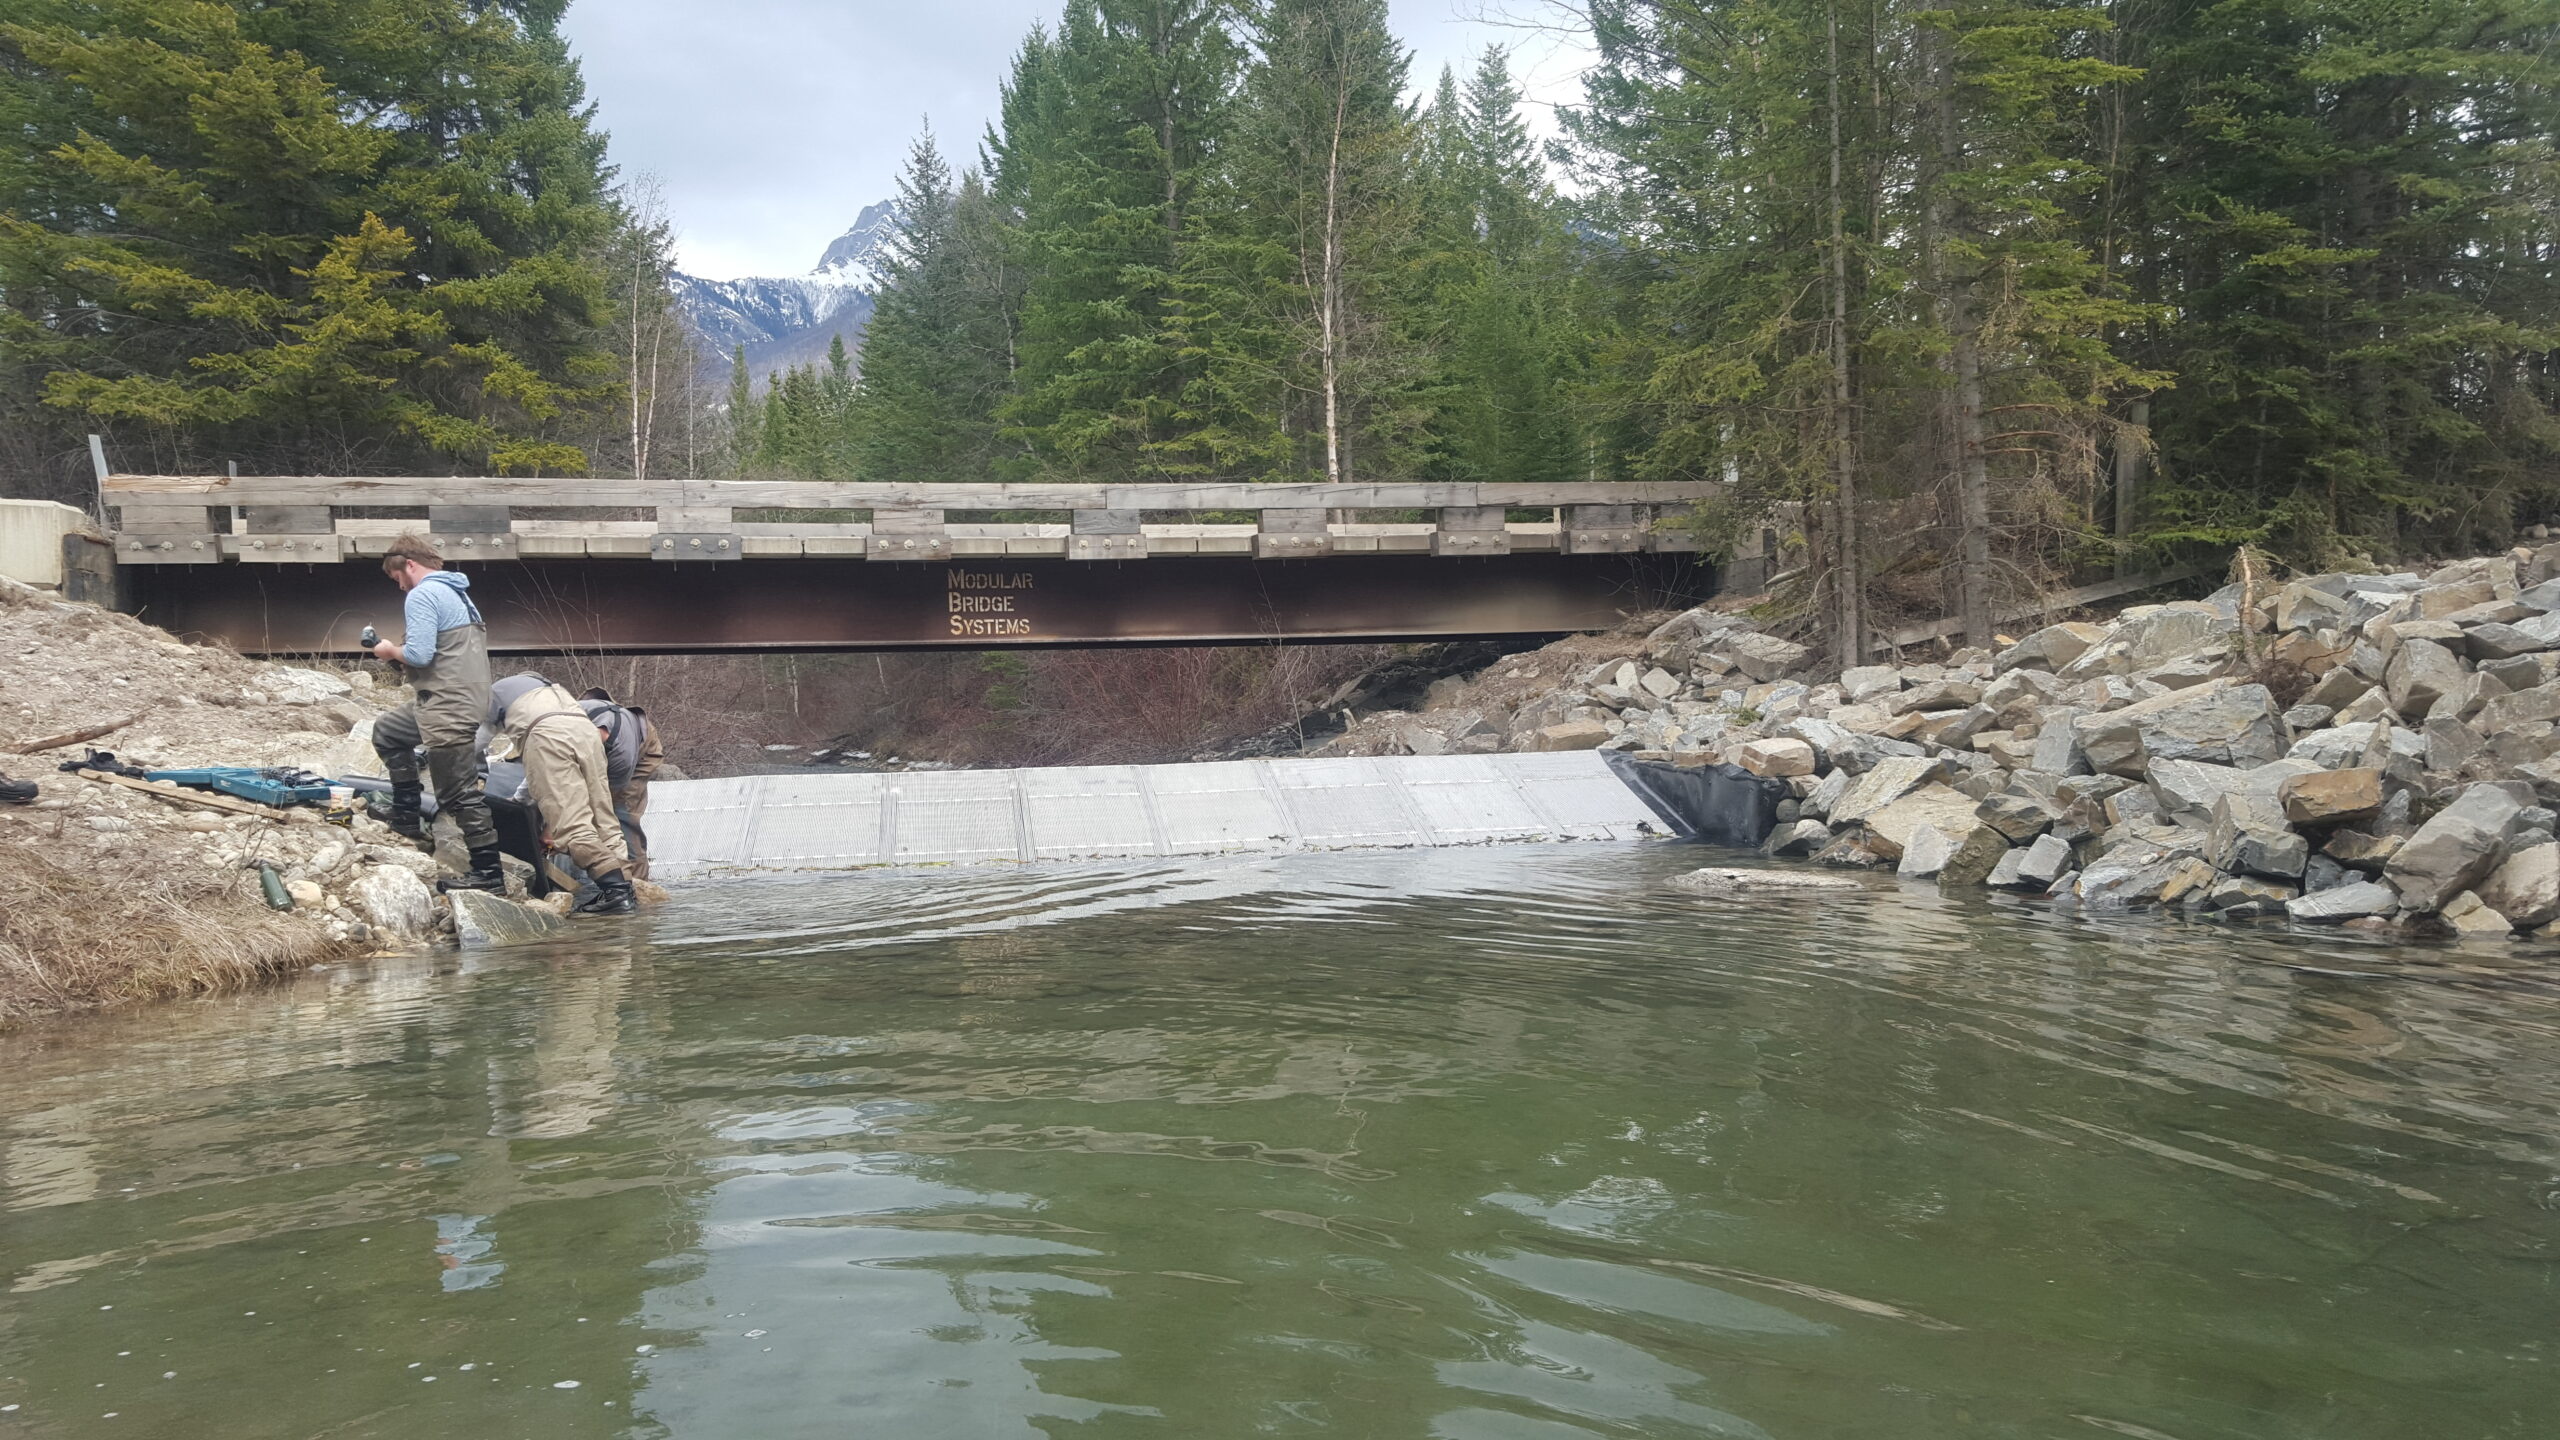 Whiteswan Lake Fish Barrier – Protecting Native Cutthroat Trout Populations